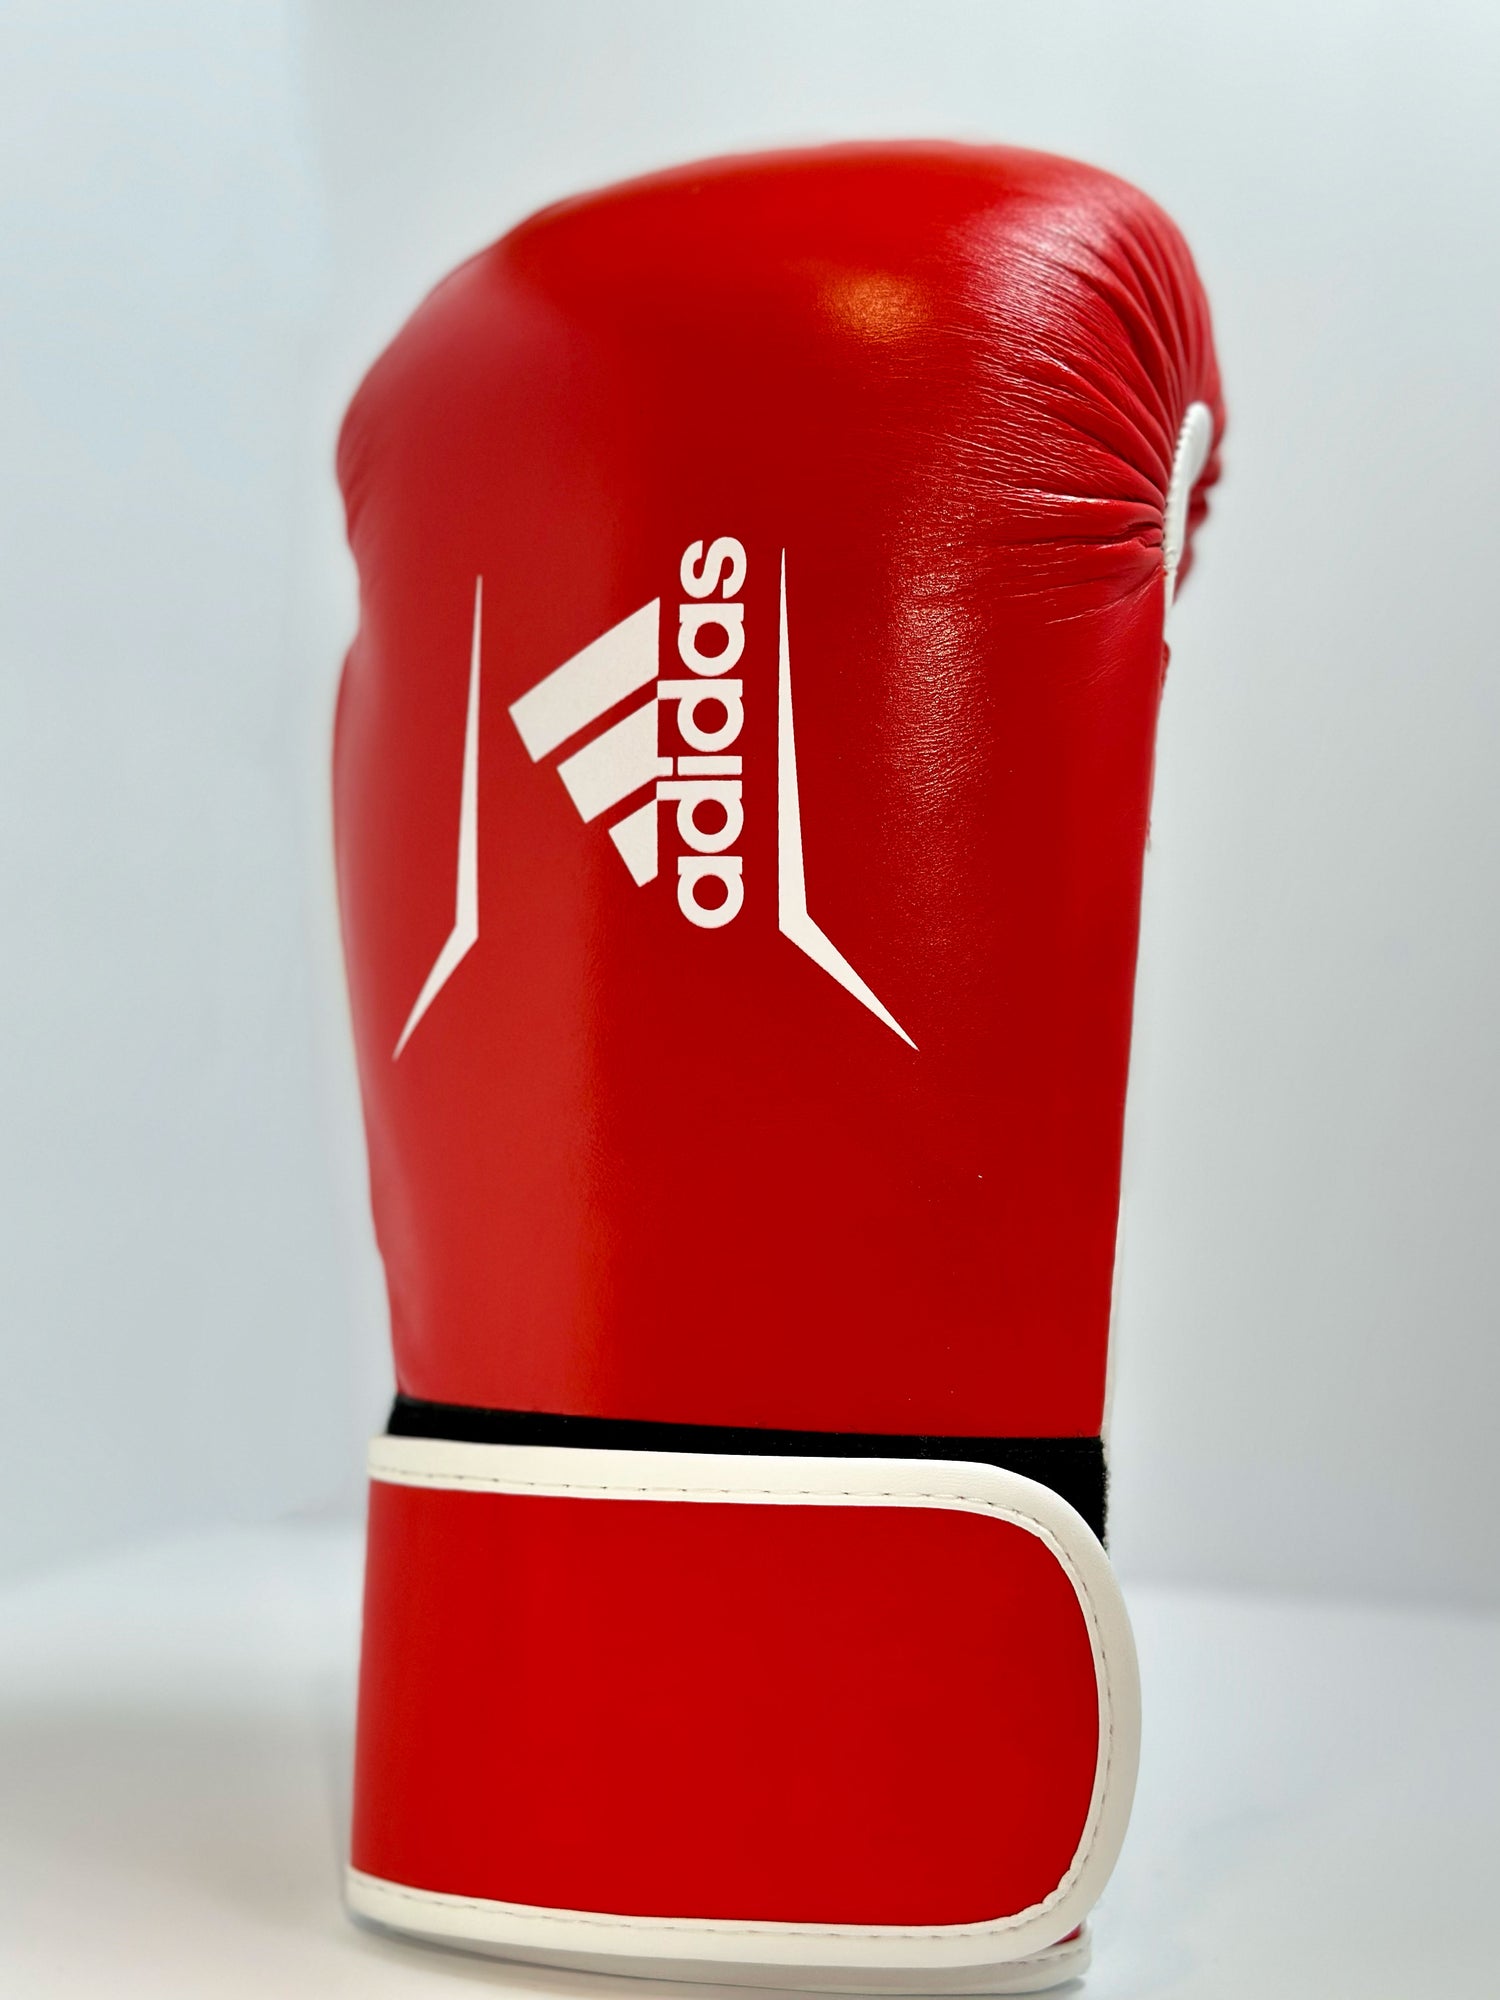 Adidas WAKO Approved Kickboxing Fight Gloves, Cowhide Cuir Leather Speed 165 adiSBG165 Competition Gloves 10 Oz Red right glove